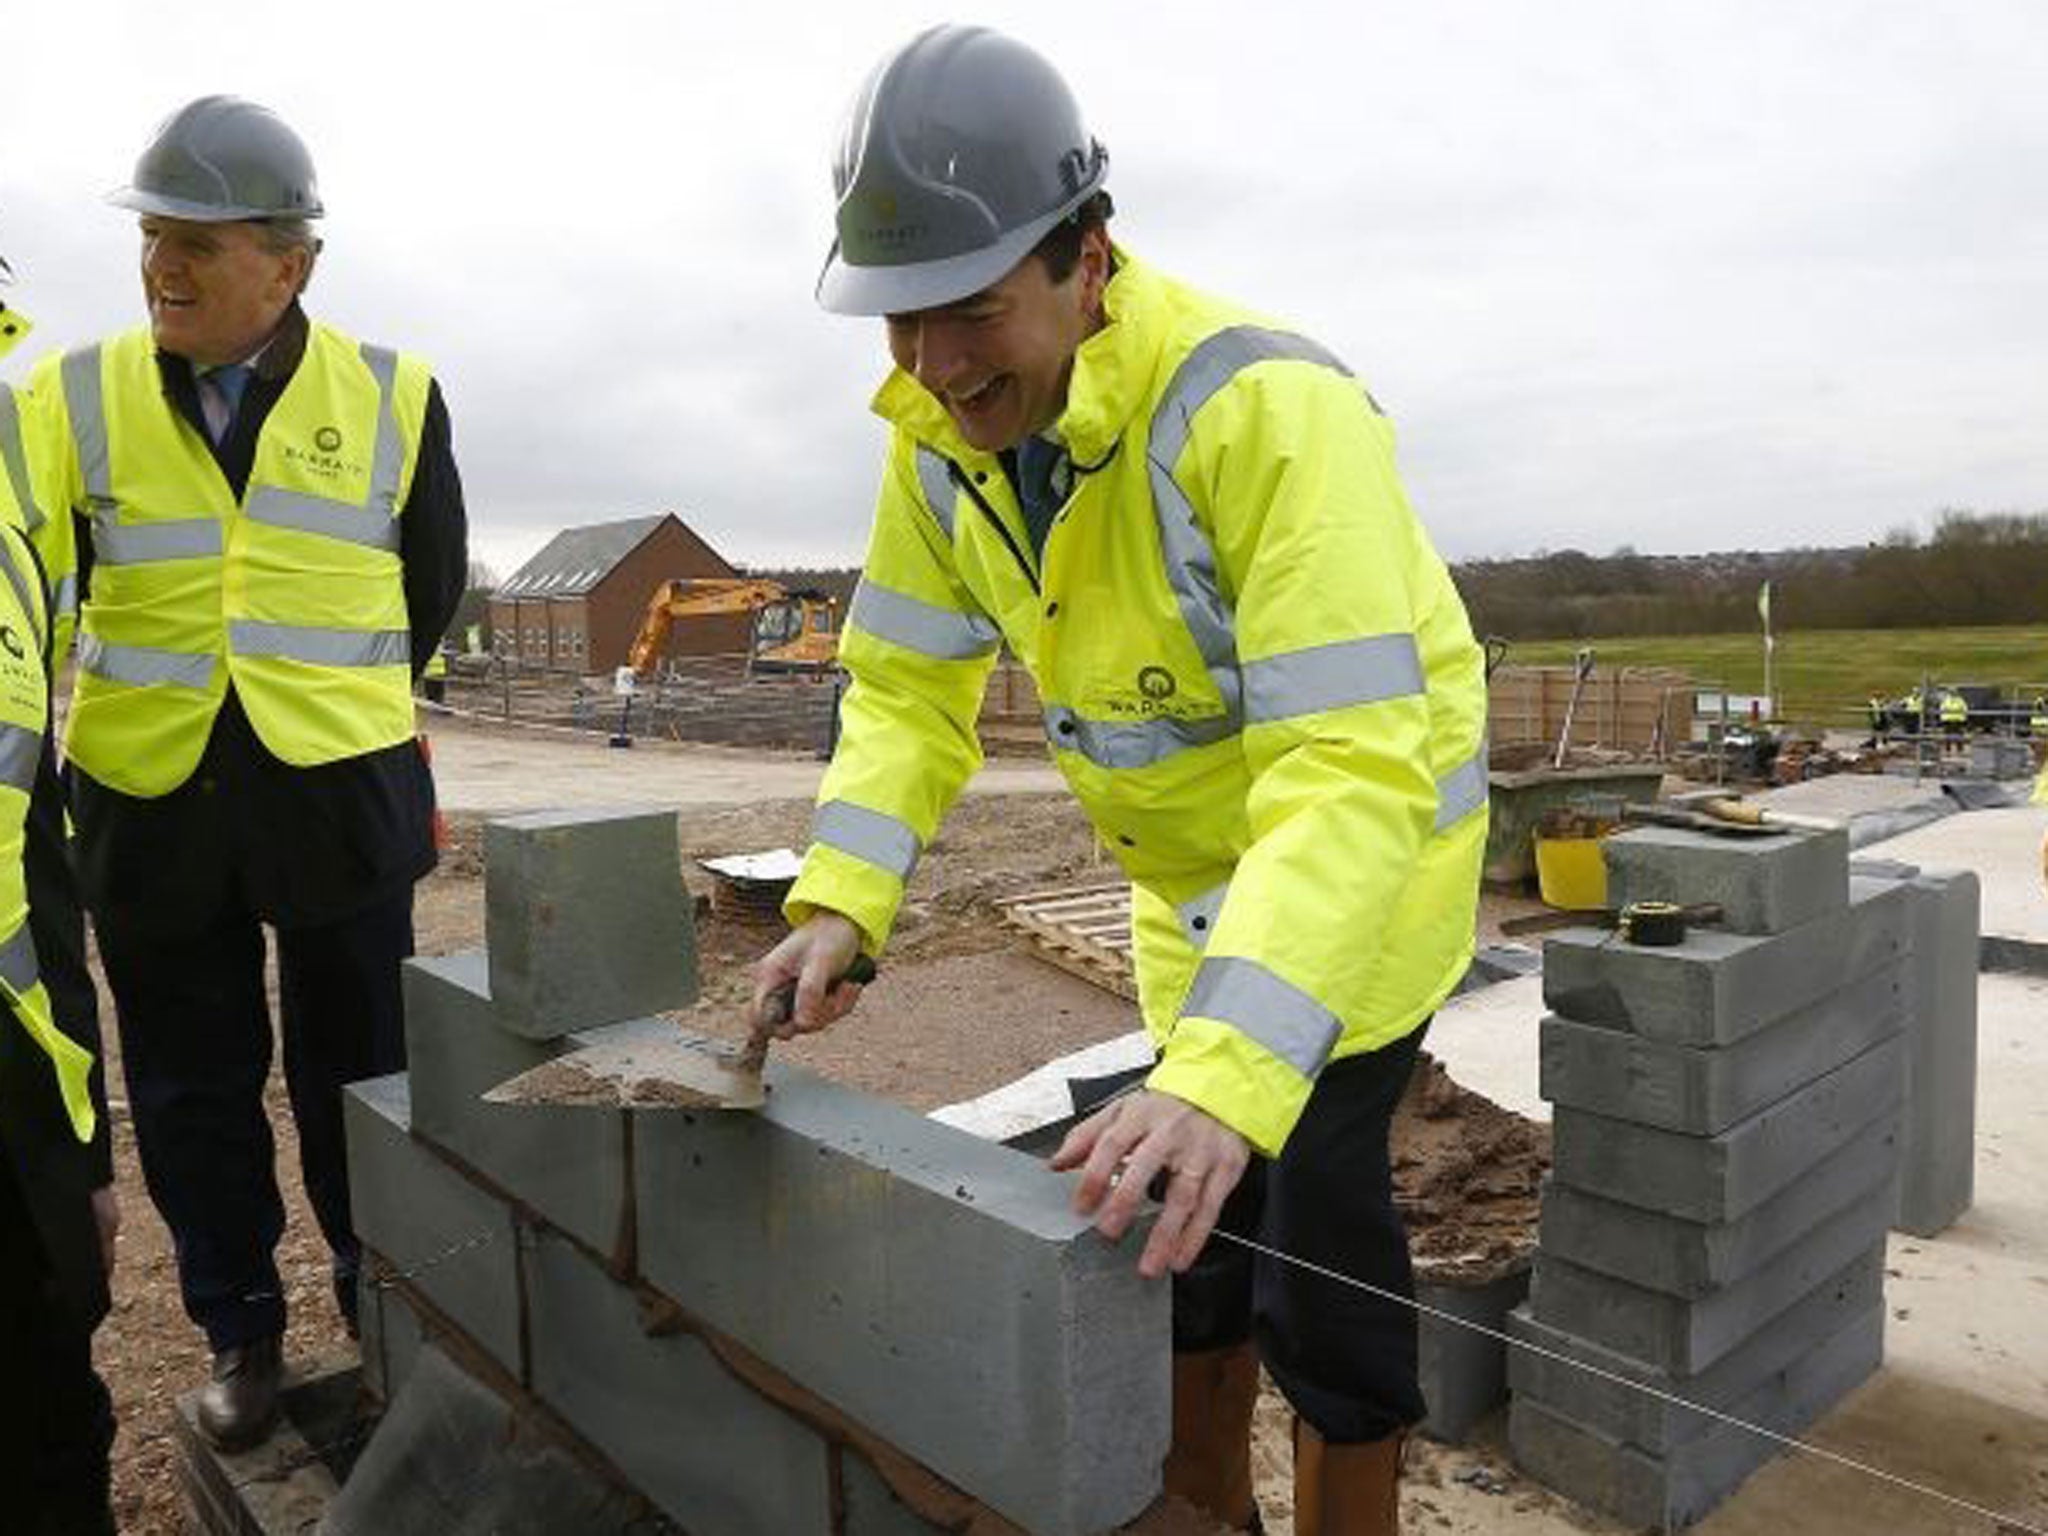 George Osborne during a visit to a Barratt Homes building site in Nuneaton the day after announcing in his budget that the government would extend the equity loan portion of the Help to Buy scheme